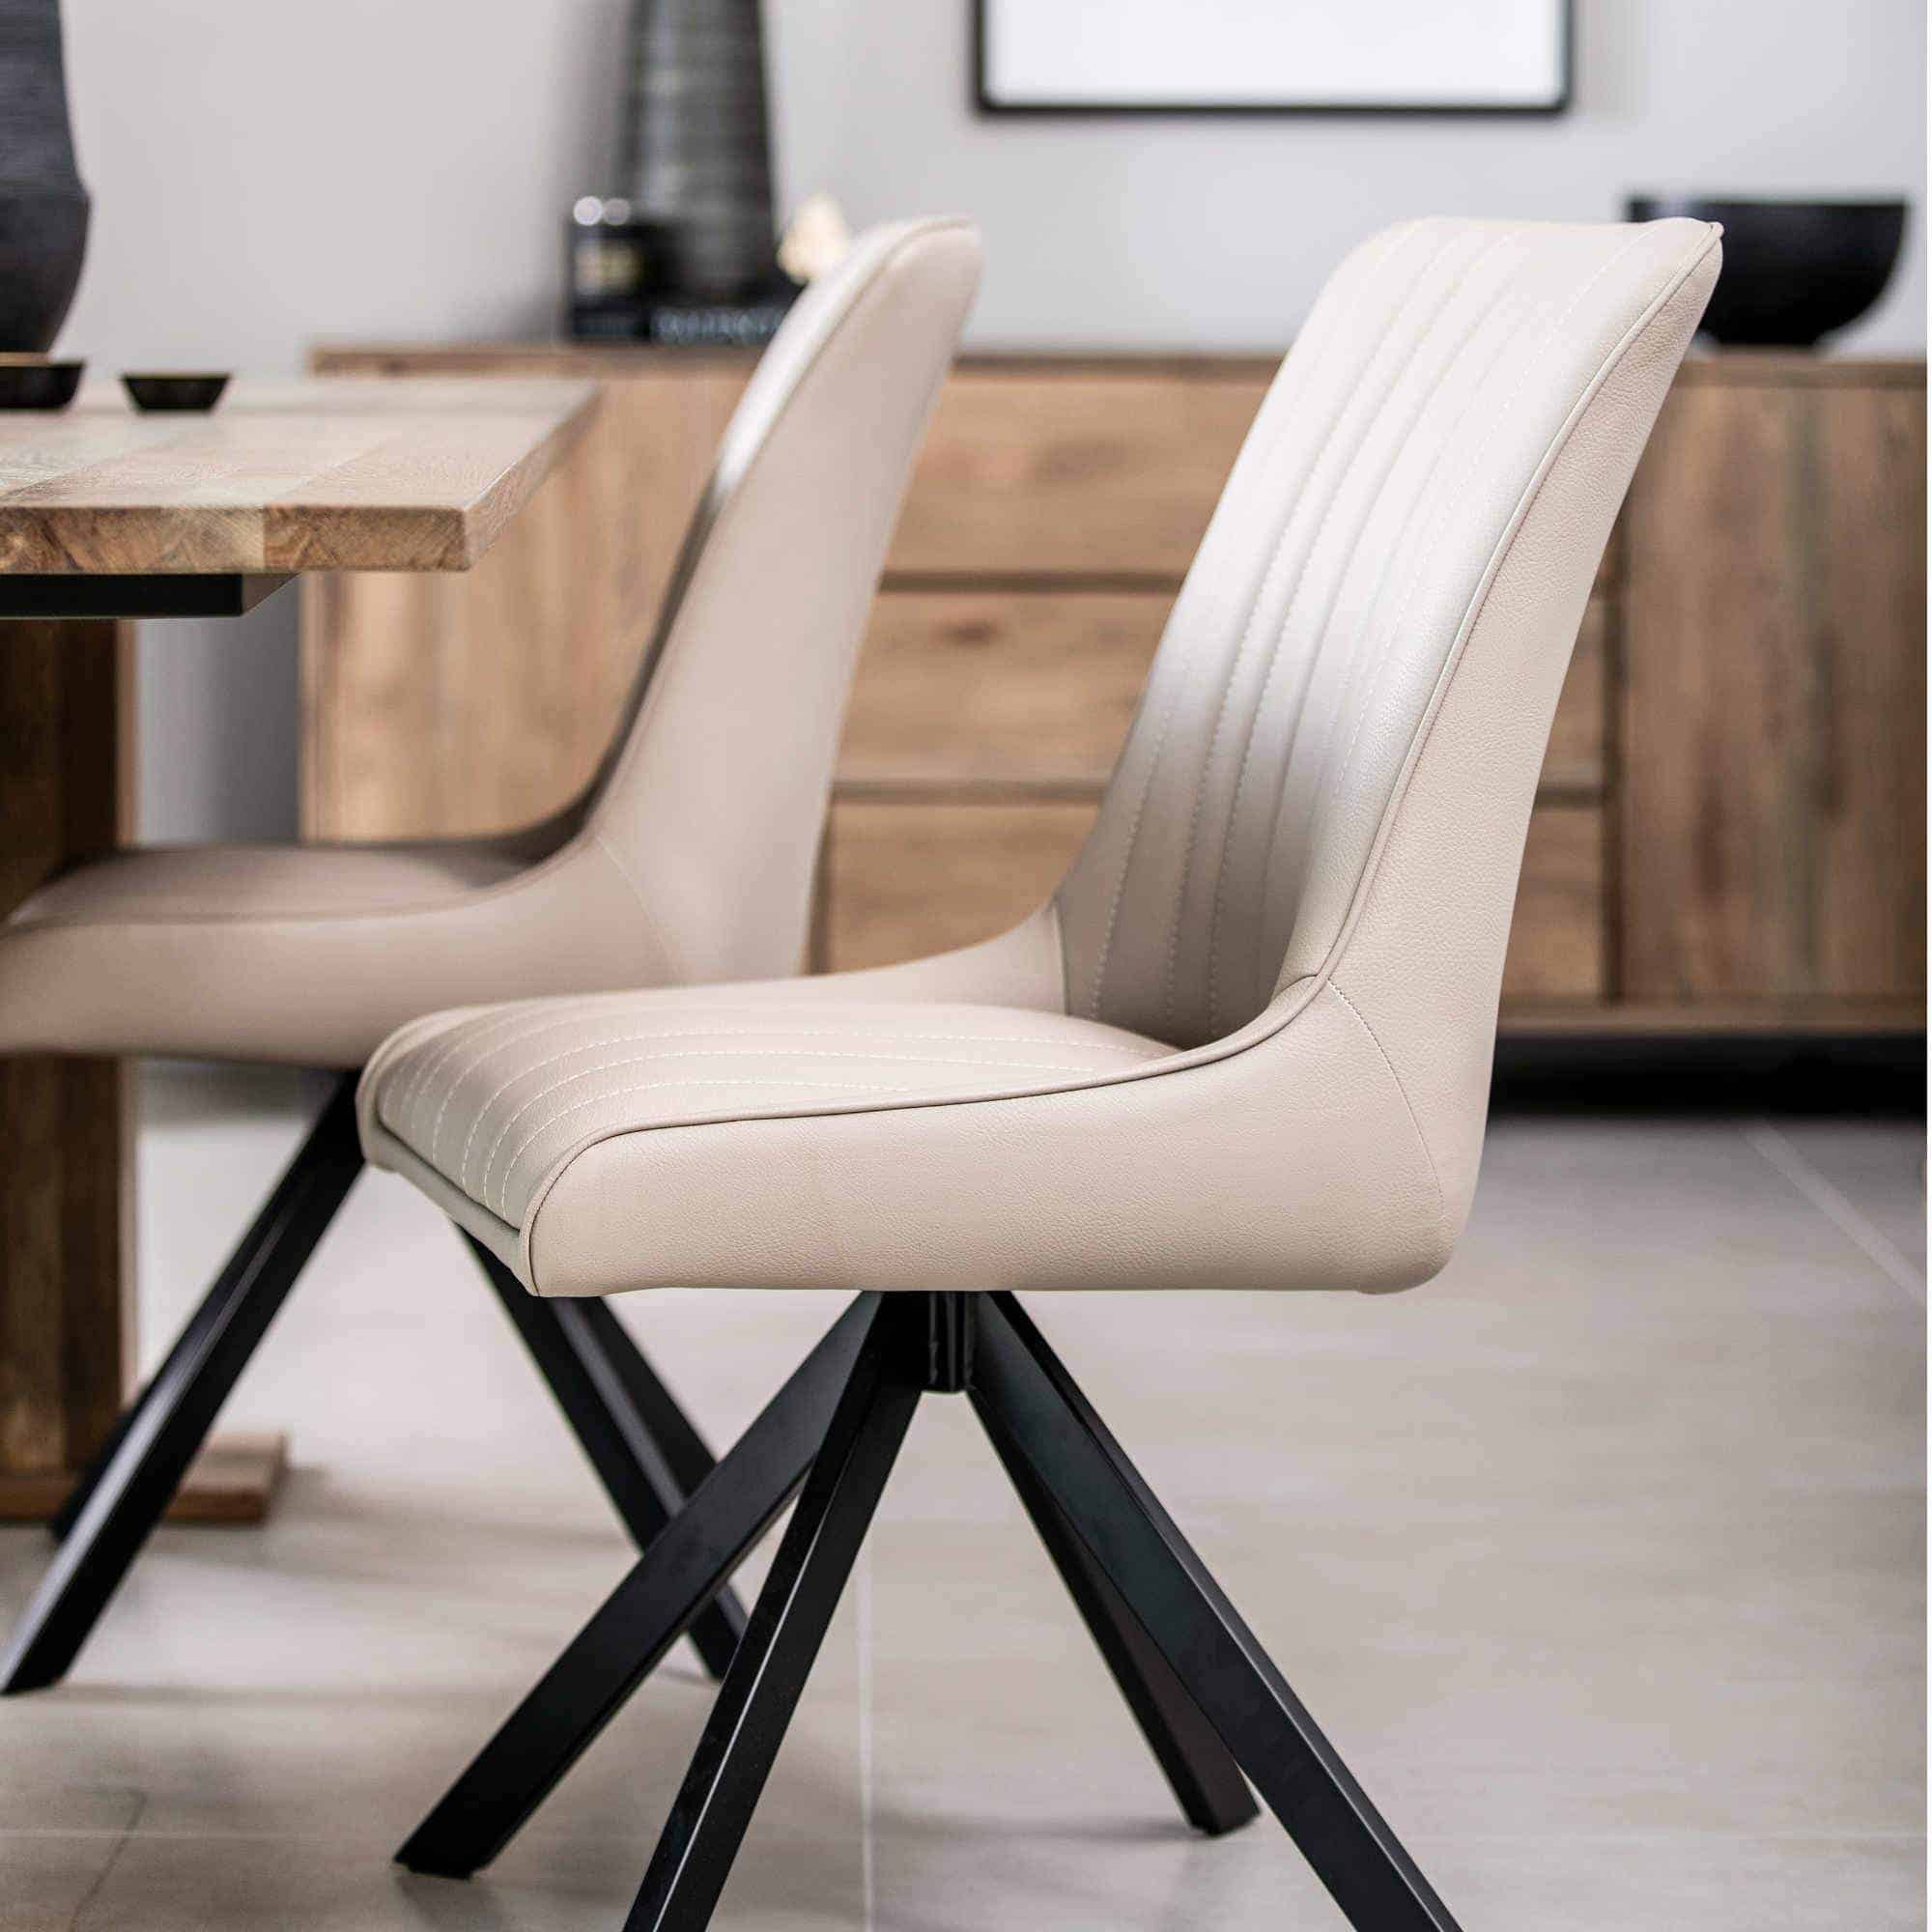 Bentley Curved Back Dining Chair - escapologyhome.co.uk